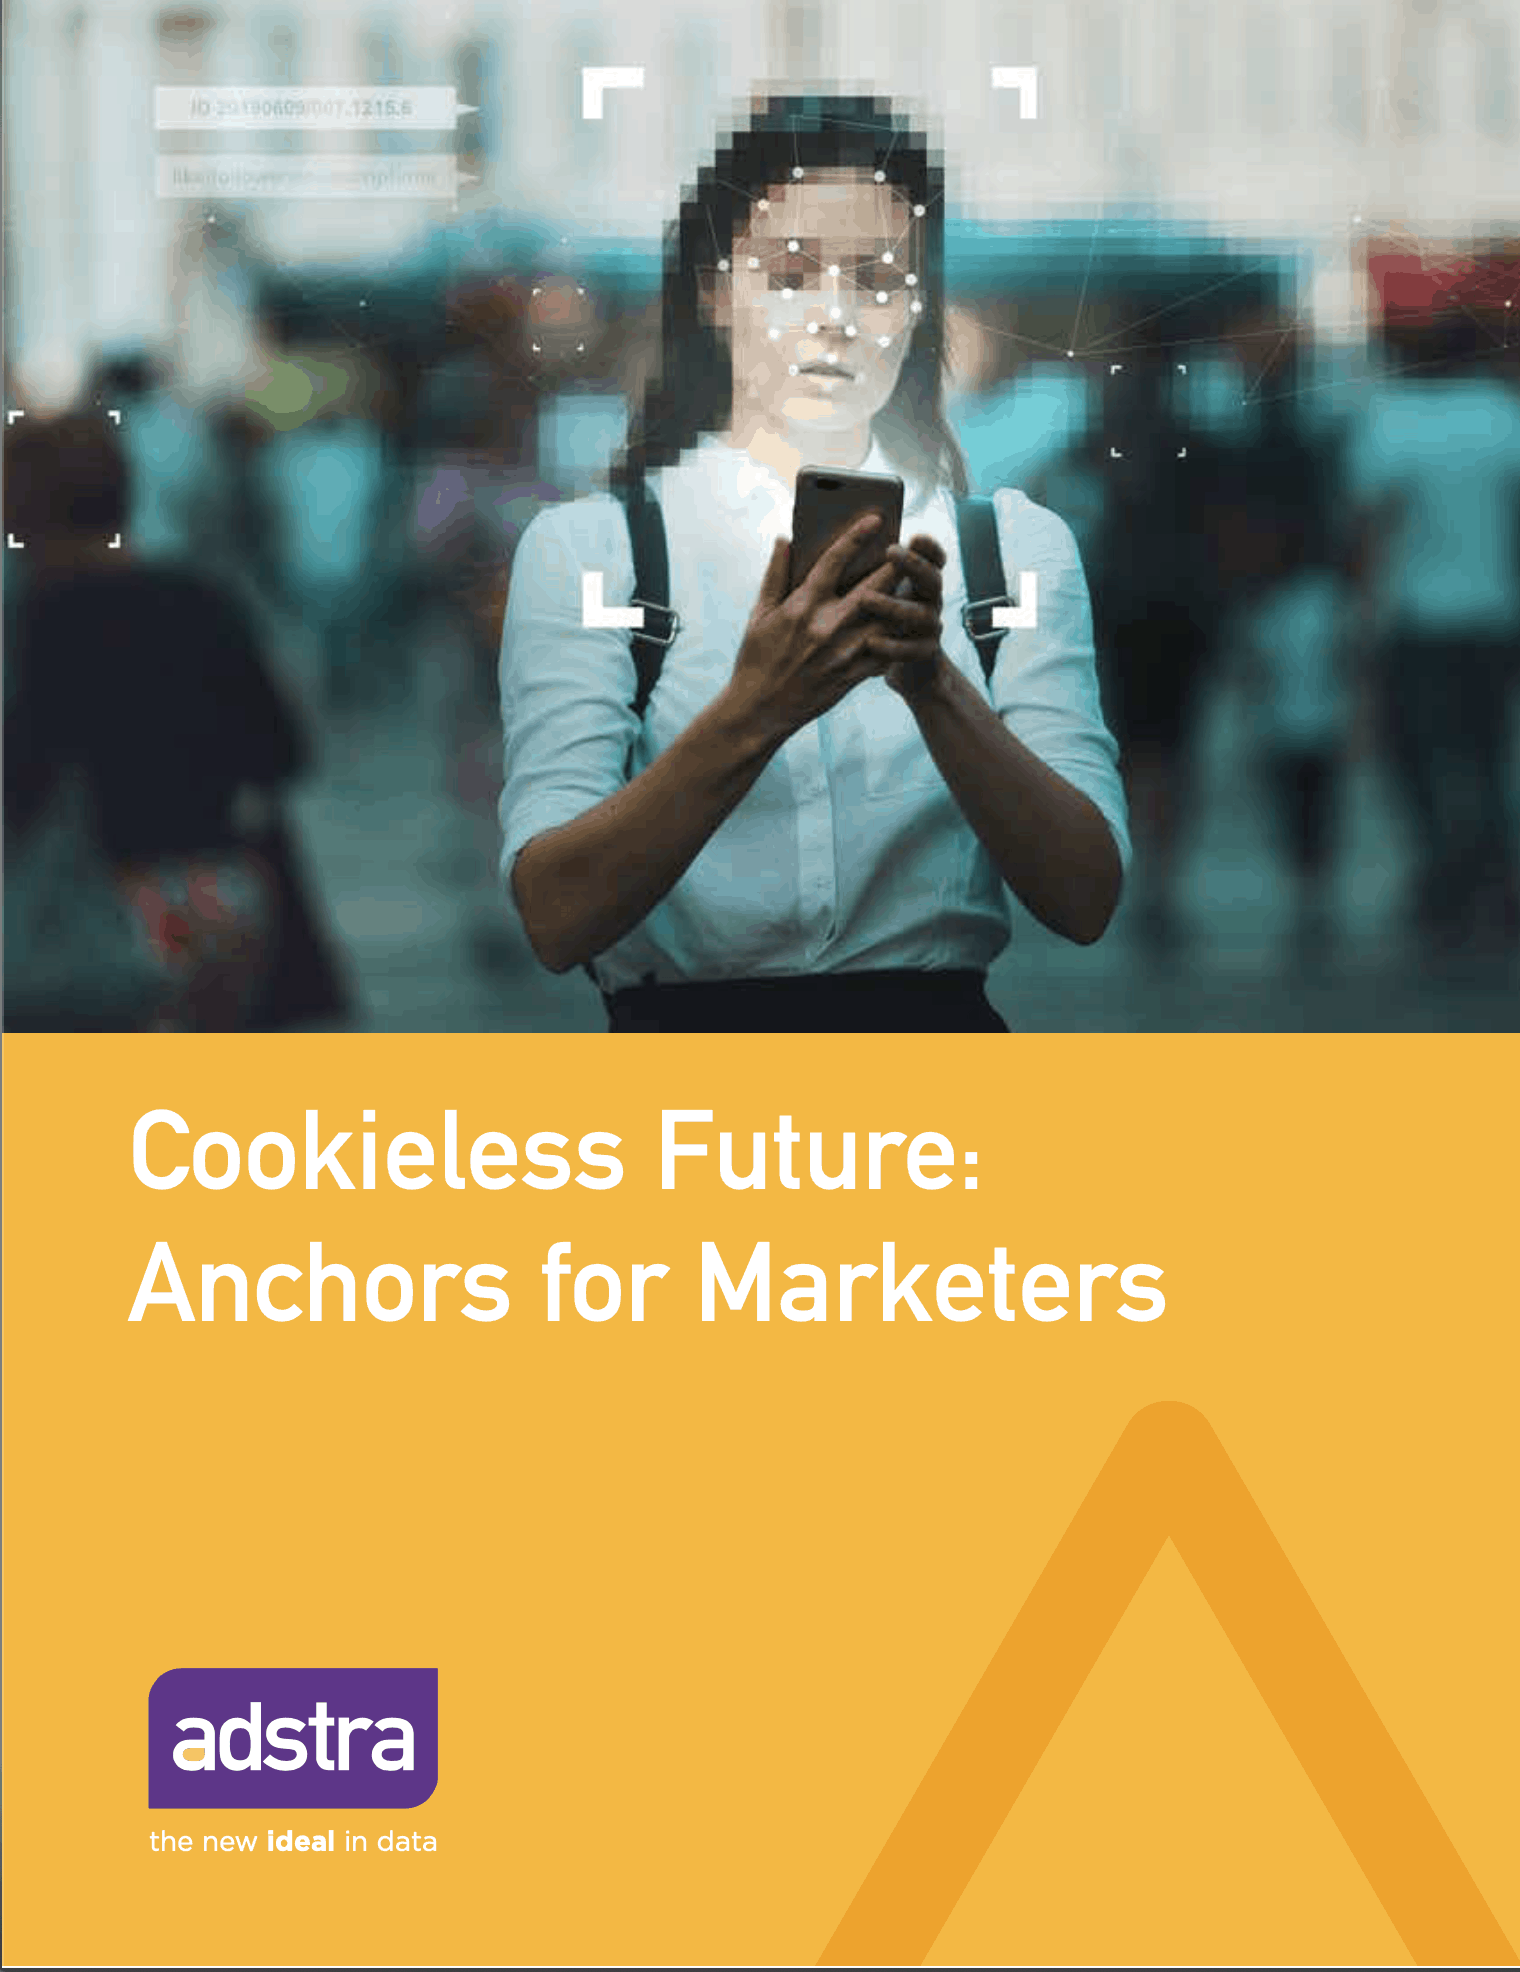 Cookieless Future: Anchors for Marketers pdf cover